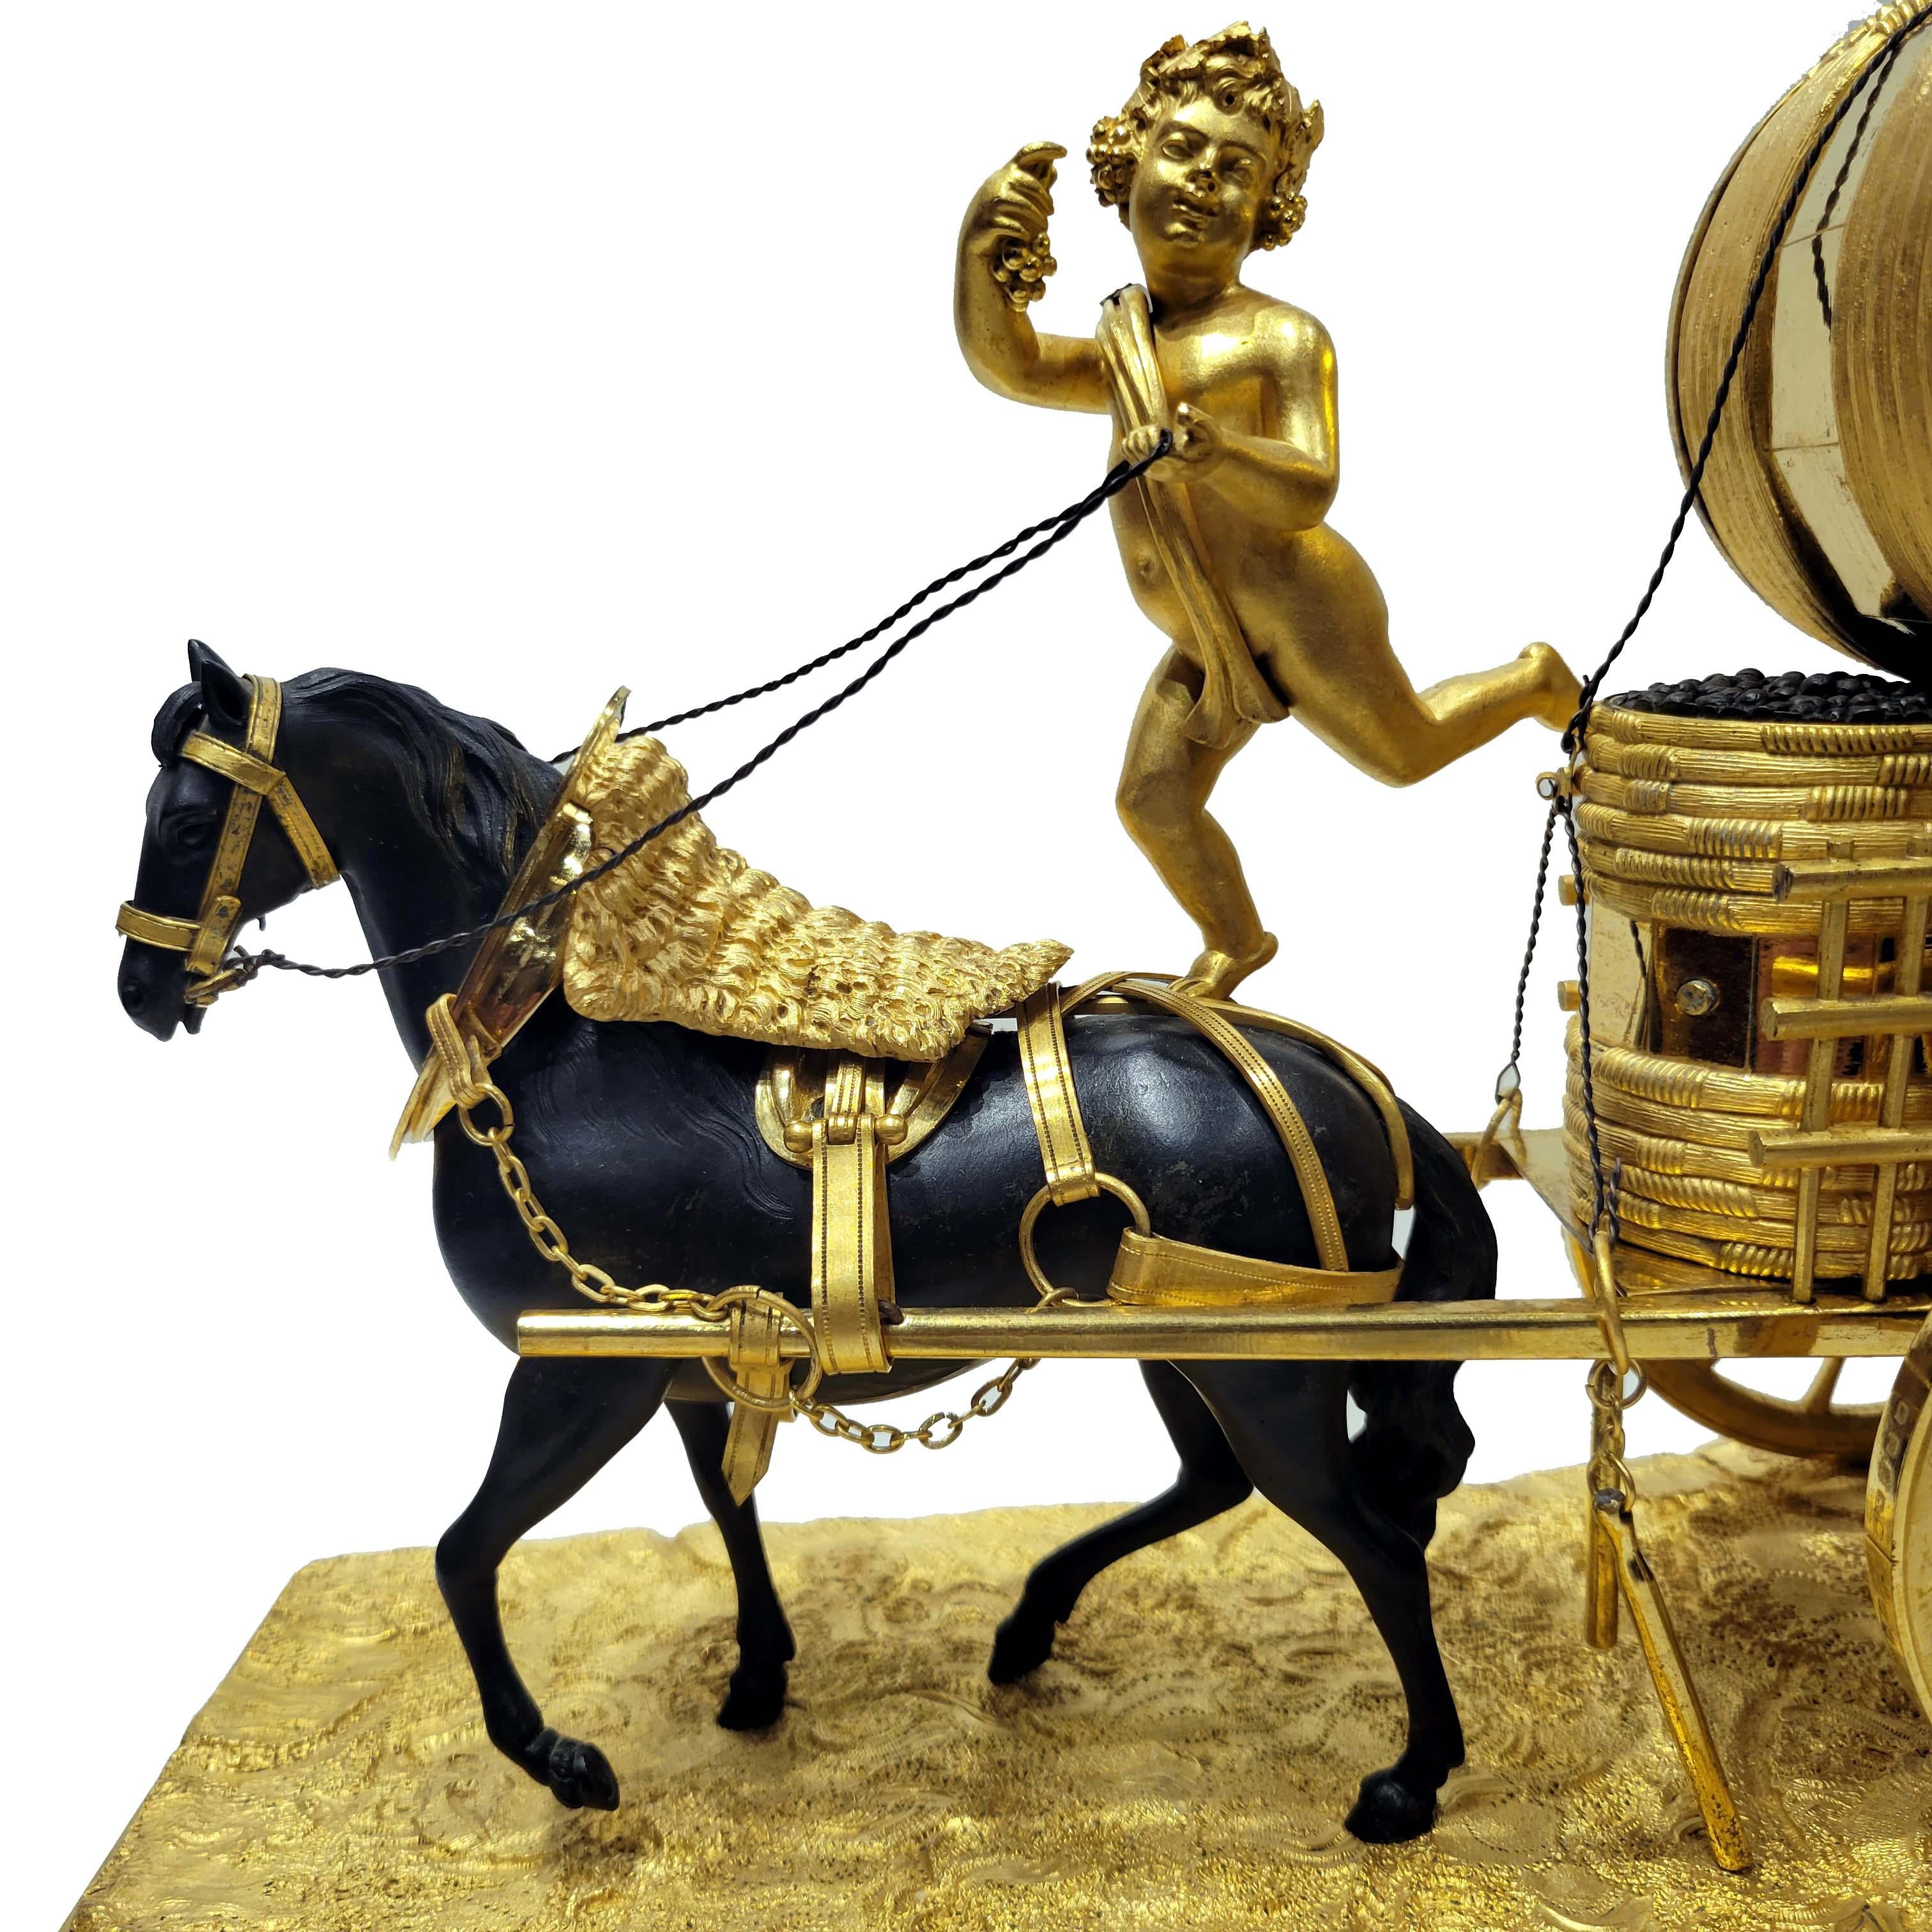 A very important and rare Directoire clock, French, circa 1790. Patinated and gilt bronze with exquisite details.
Depicting a horse driven carriage, carrying barrels of grapes and wine with a cherub as the driver.
Burnished fire-gilt highlights.